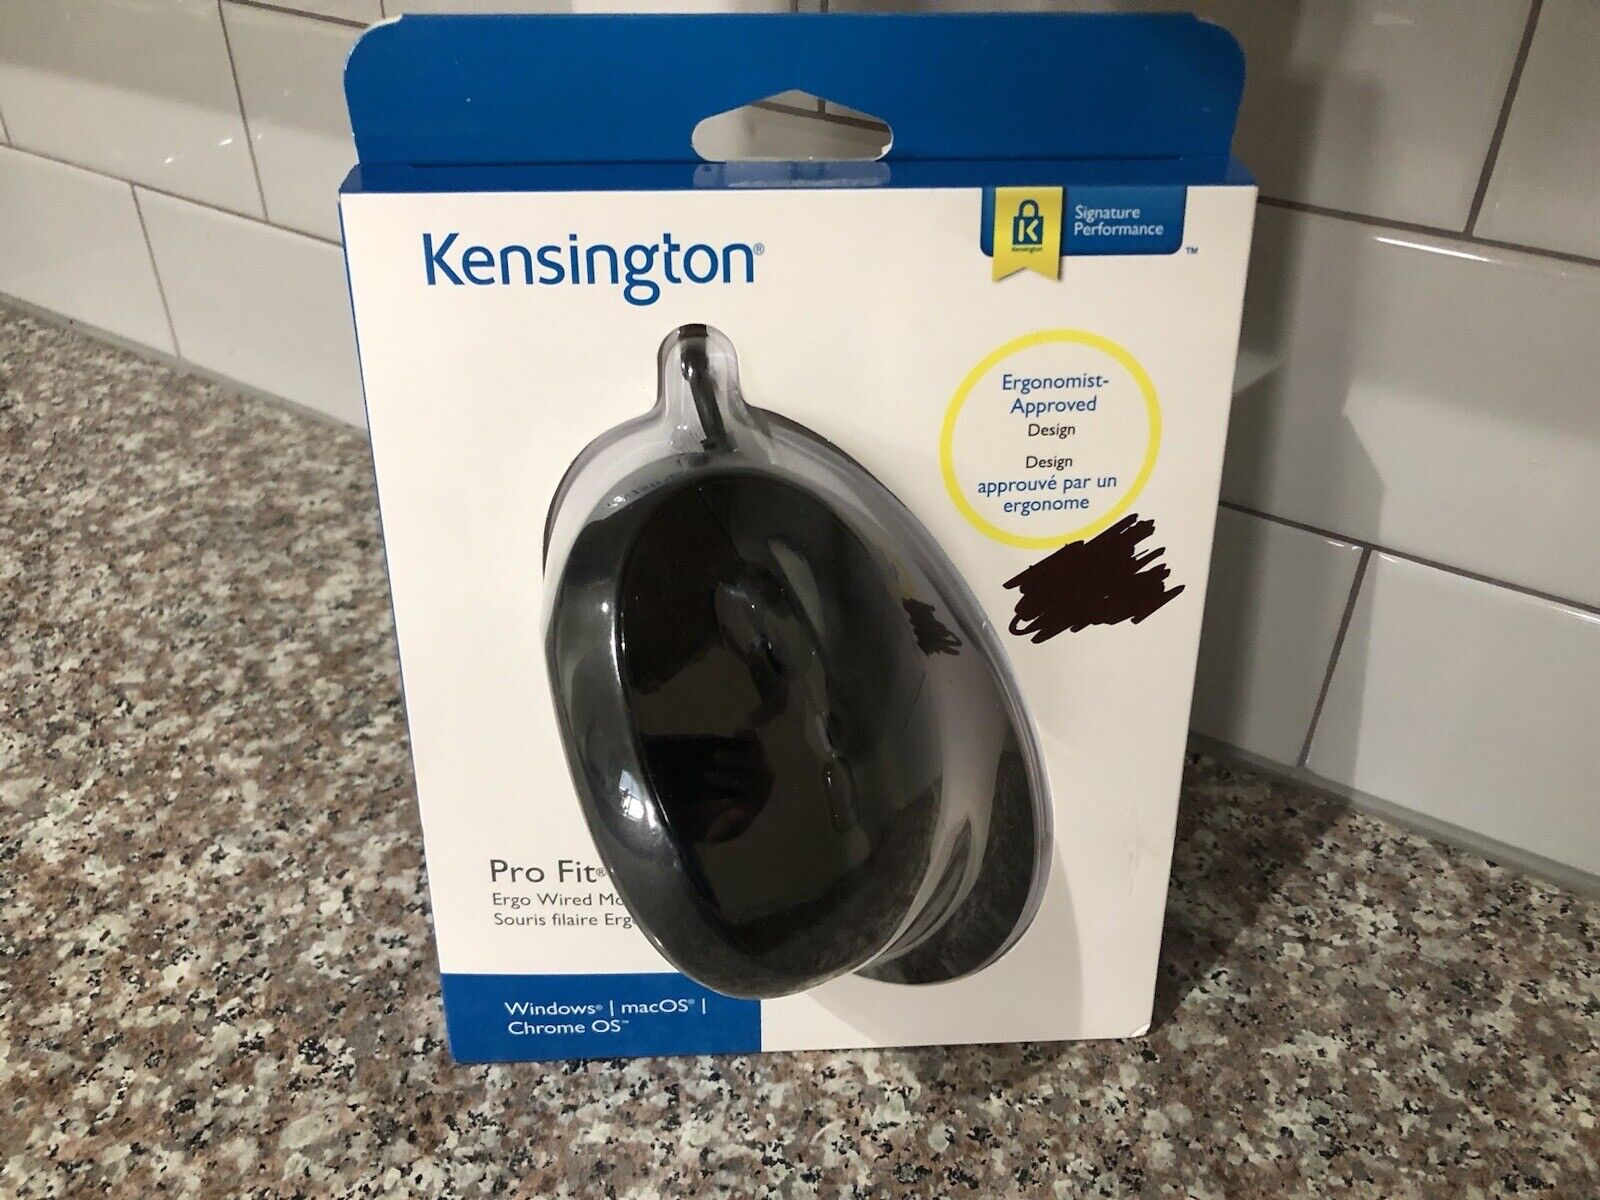 Kensington Pro Fit Ergo Wired Mouse New Sealed